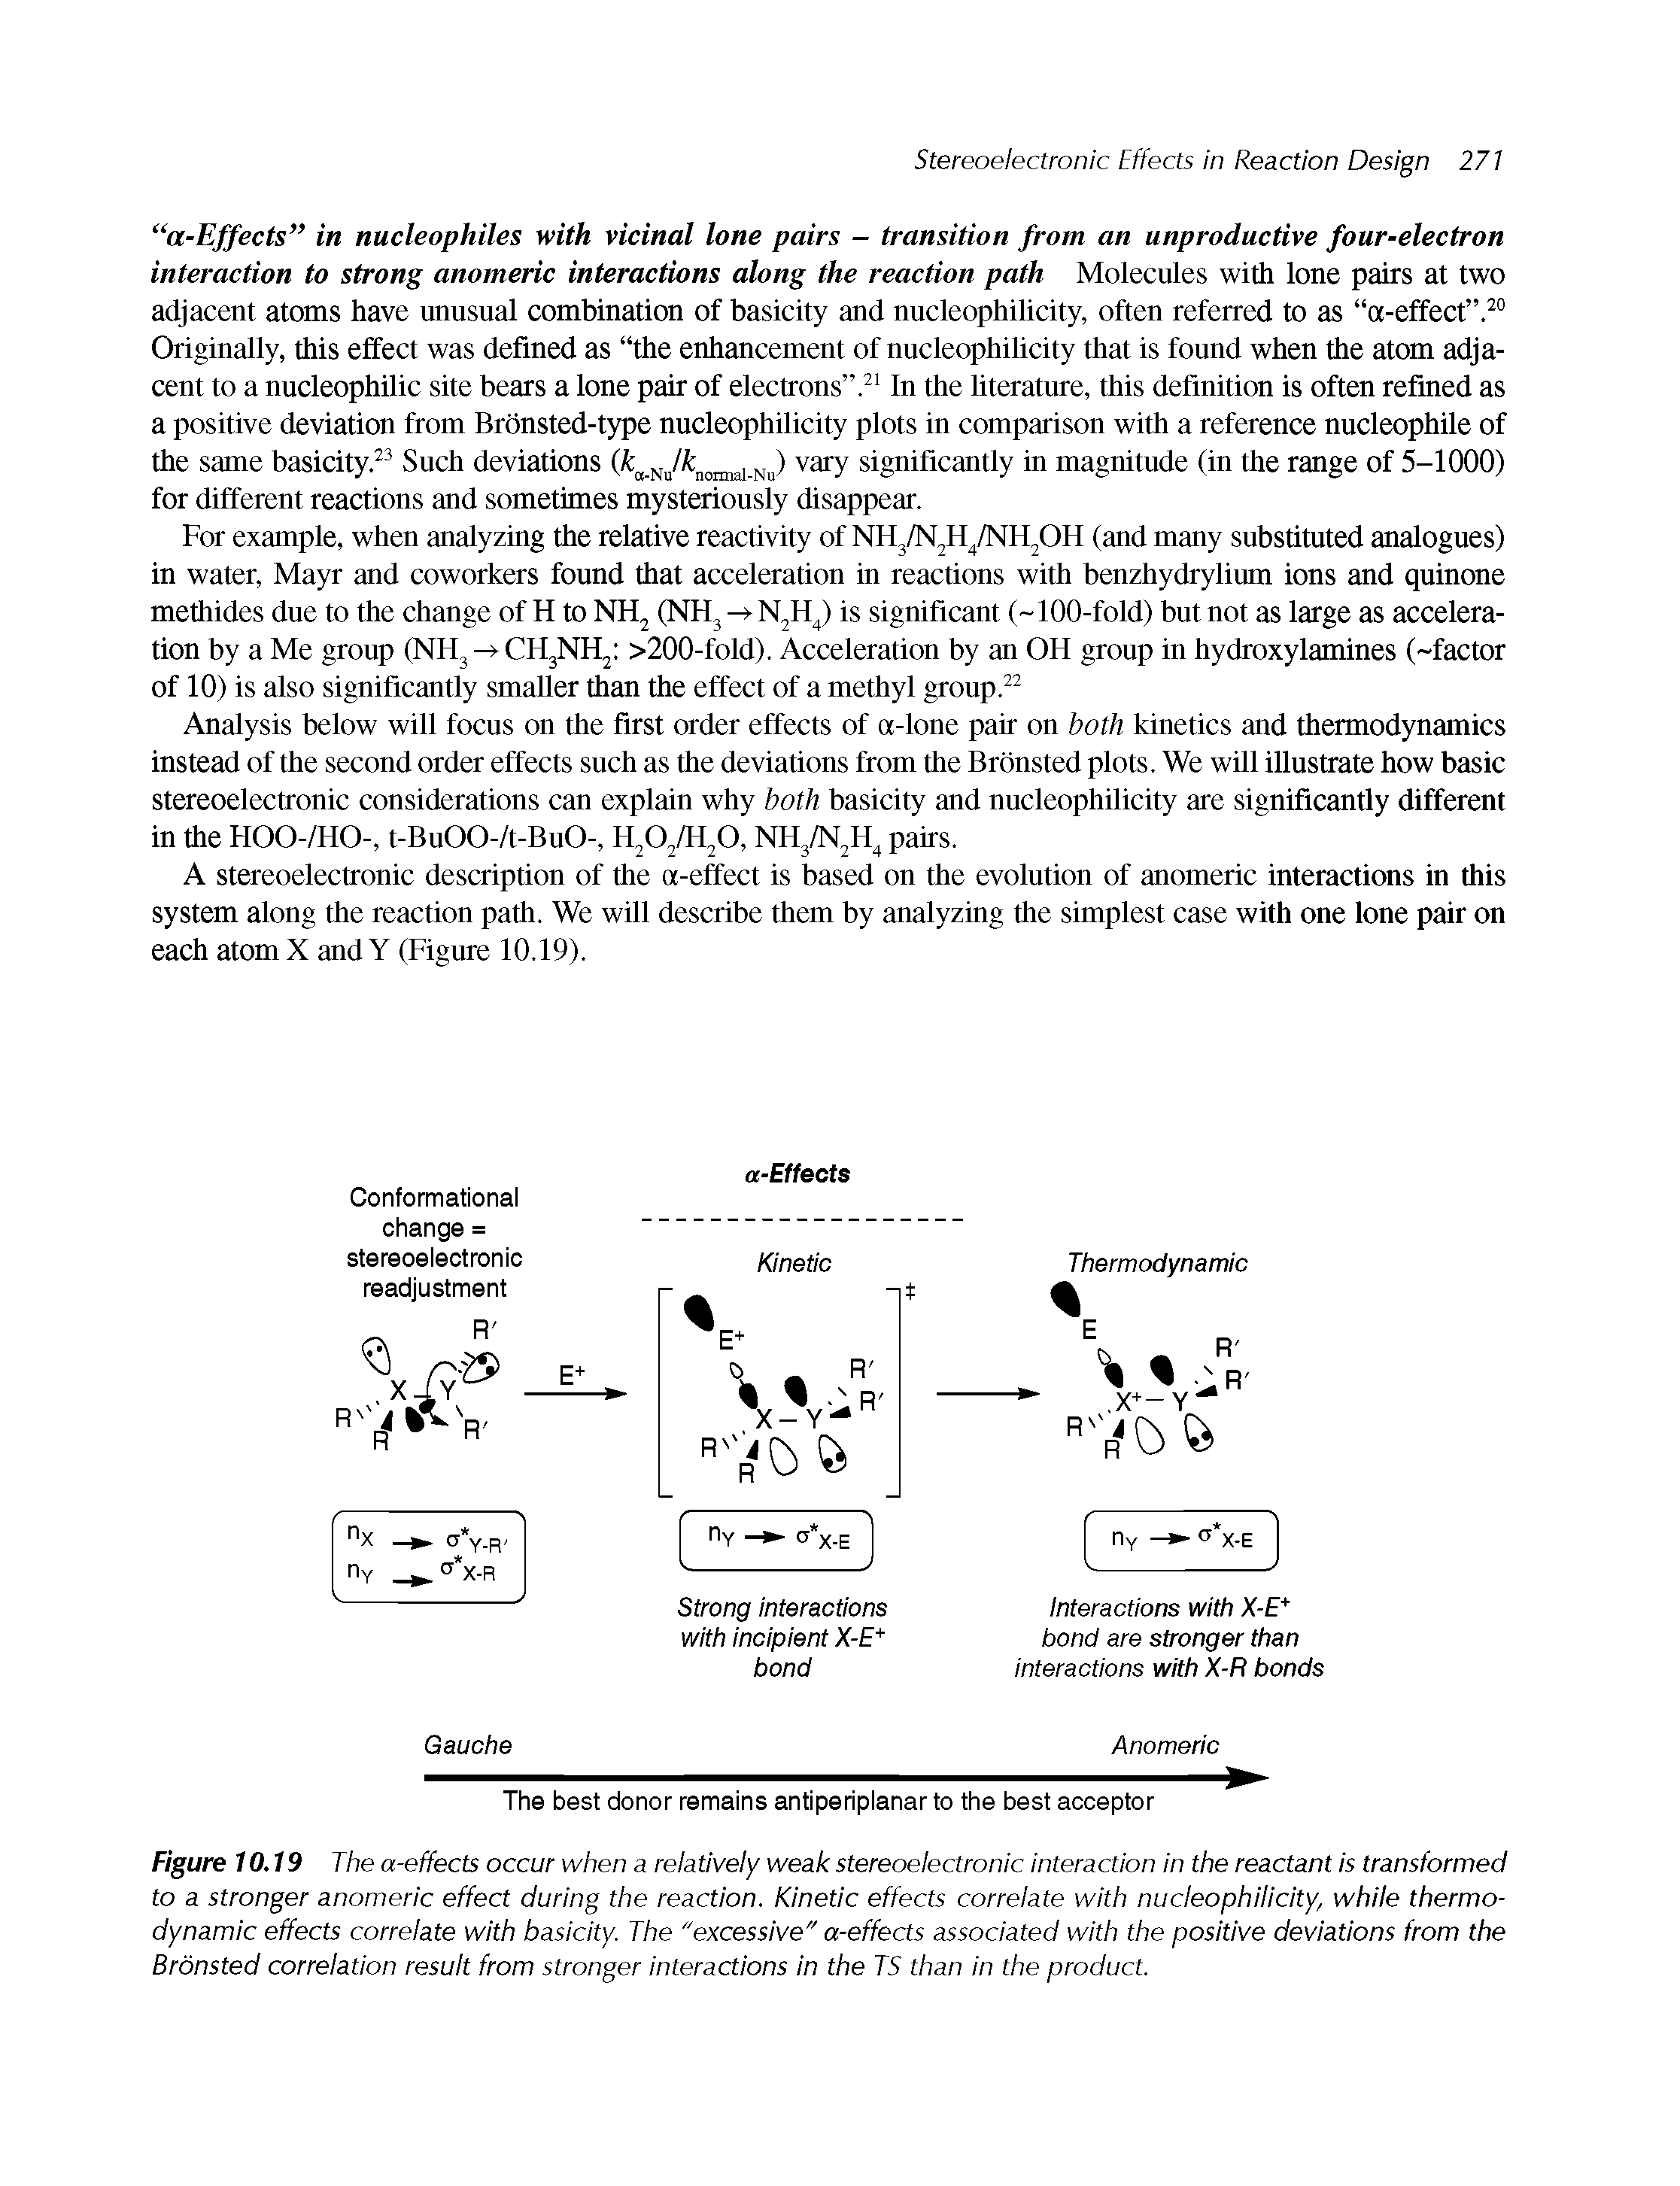 Figure 10.19 The a-effects occur when a reiatively weak stereoeiectronic interaction in the reactant is transformed to a stronger anomeric effect during the reaction. Kinetic effects correlate with nucleophilicity, while thermodynamic effects correlate with basicity. The "excessive" a-effects associated with the positive deviations from the Bronsted correlation result from stronger interactions in the TS than in the product.